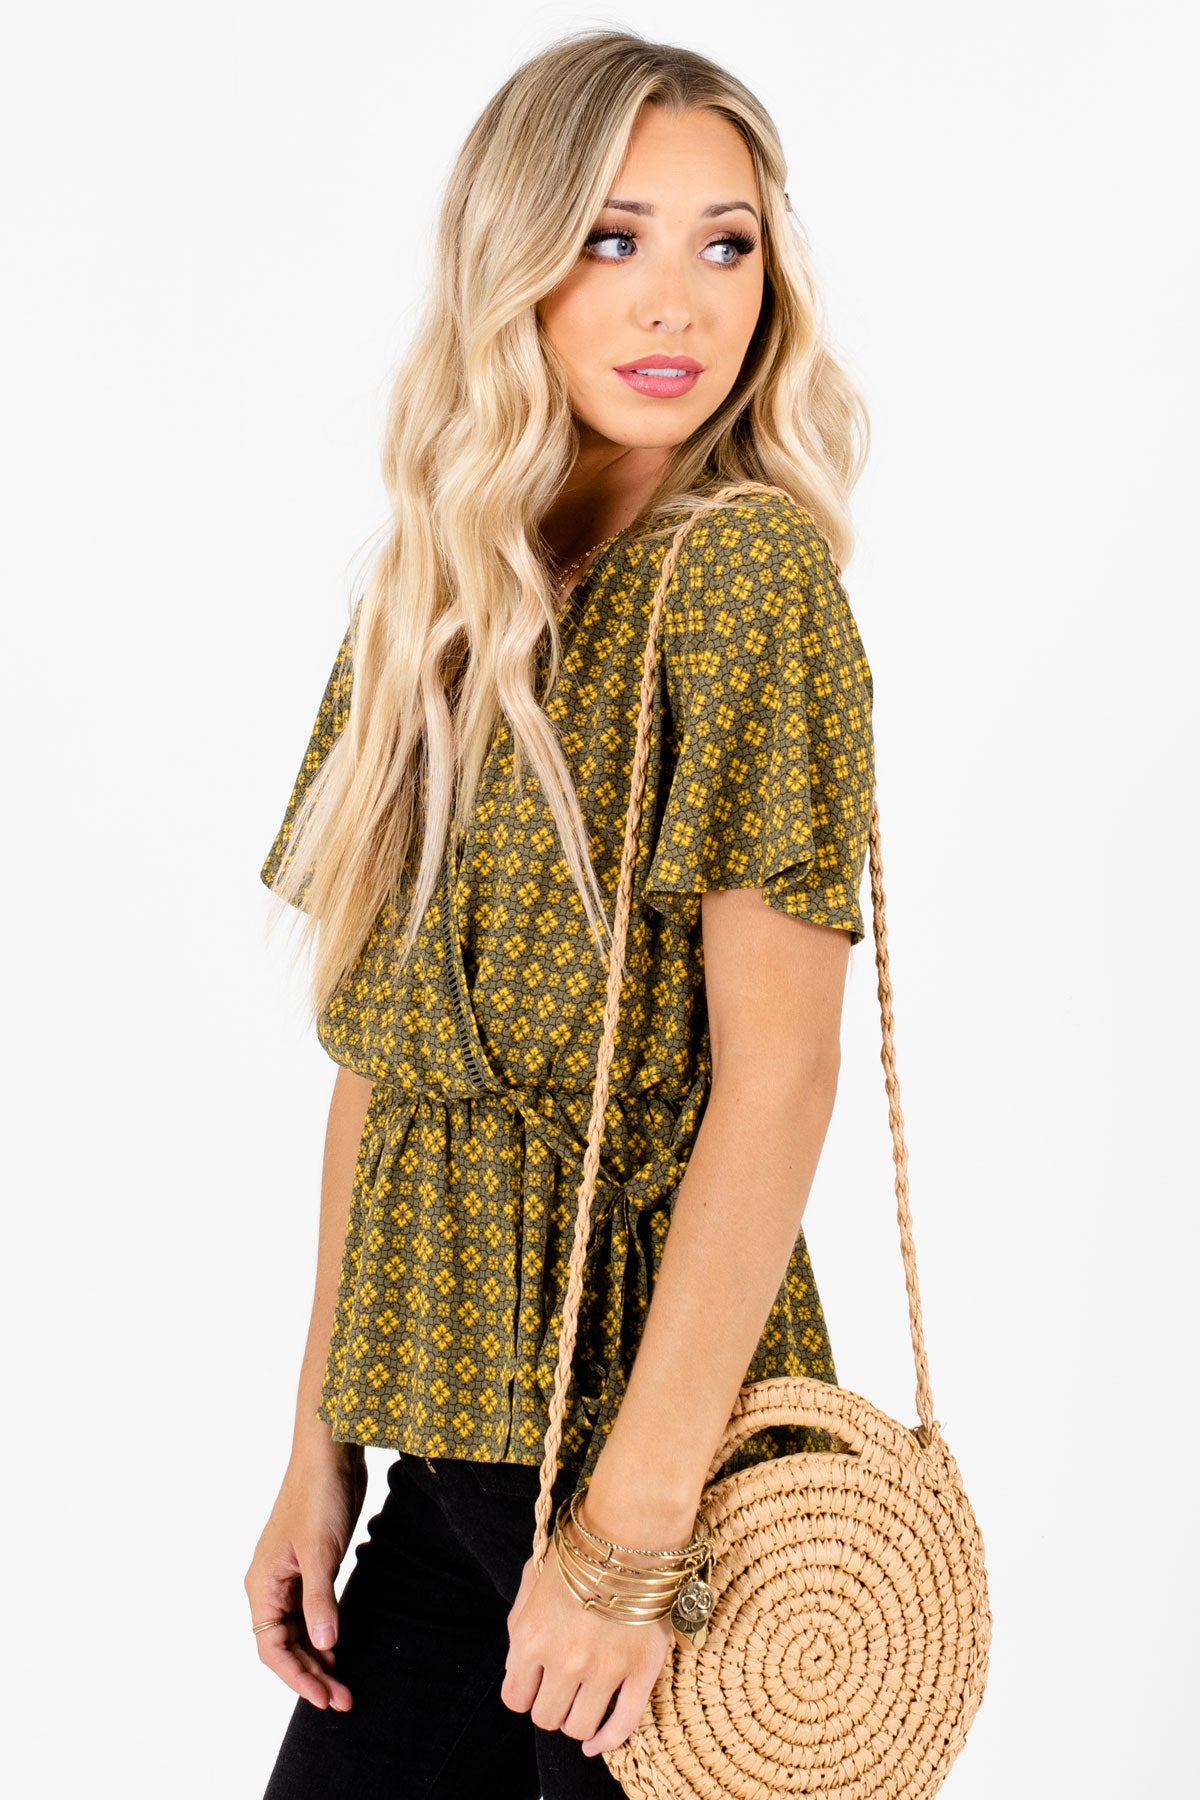 Olive Green Ladder Lace Accented Boutique Blouses for Women